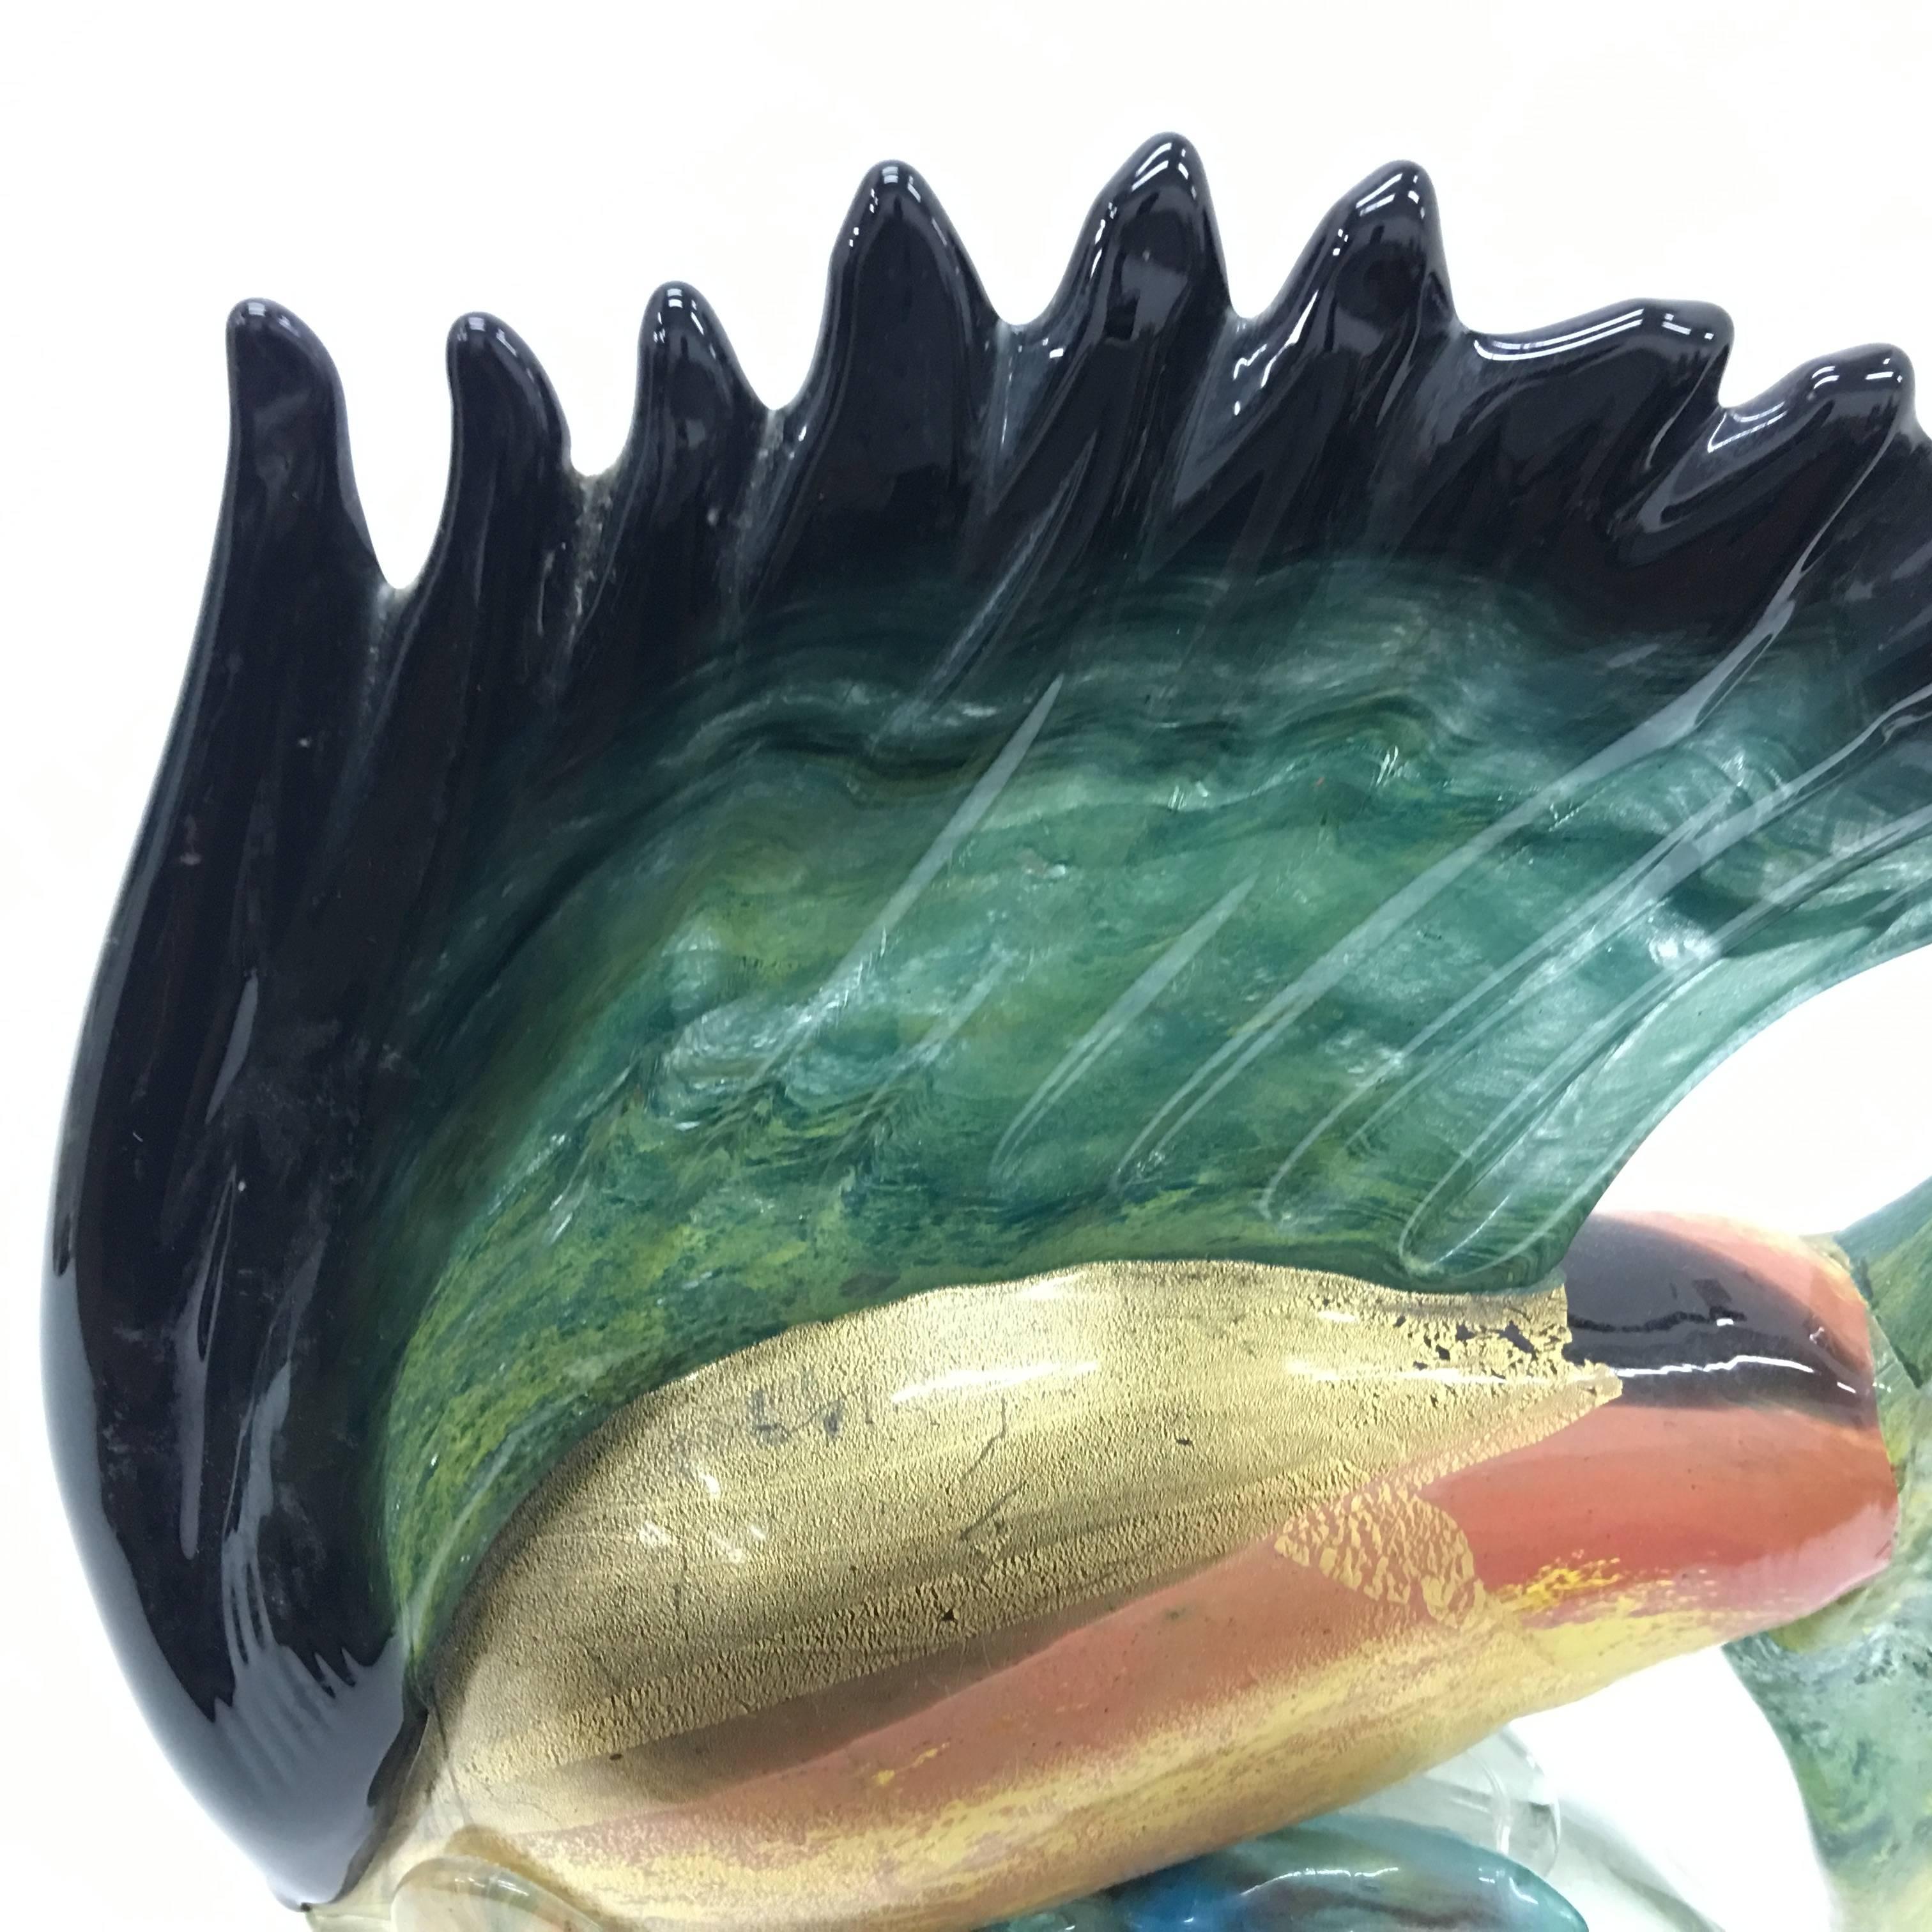 Particular handcrafted Murano glass sculpture of a fish, good conditions overall.